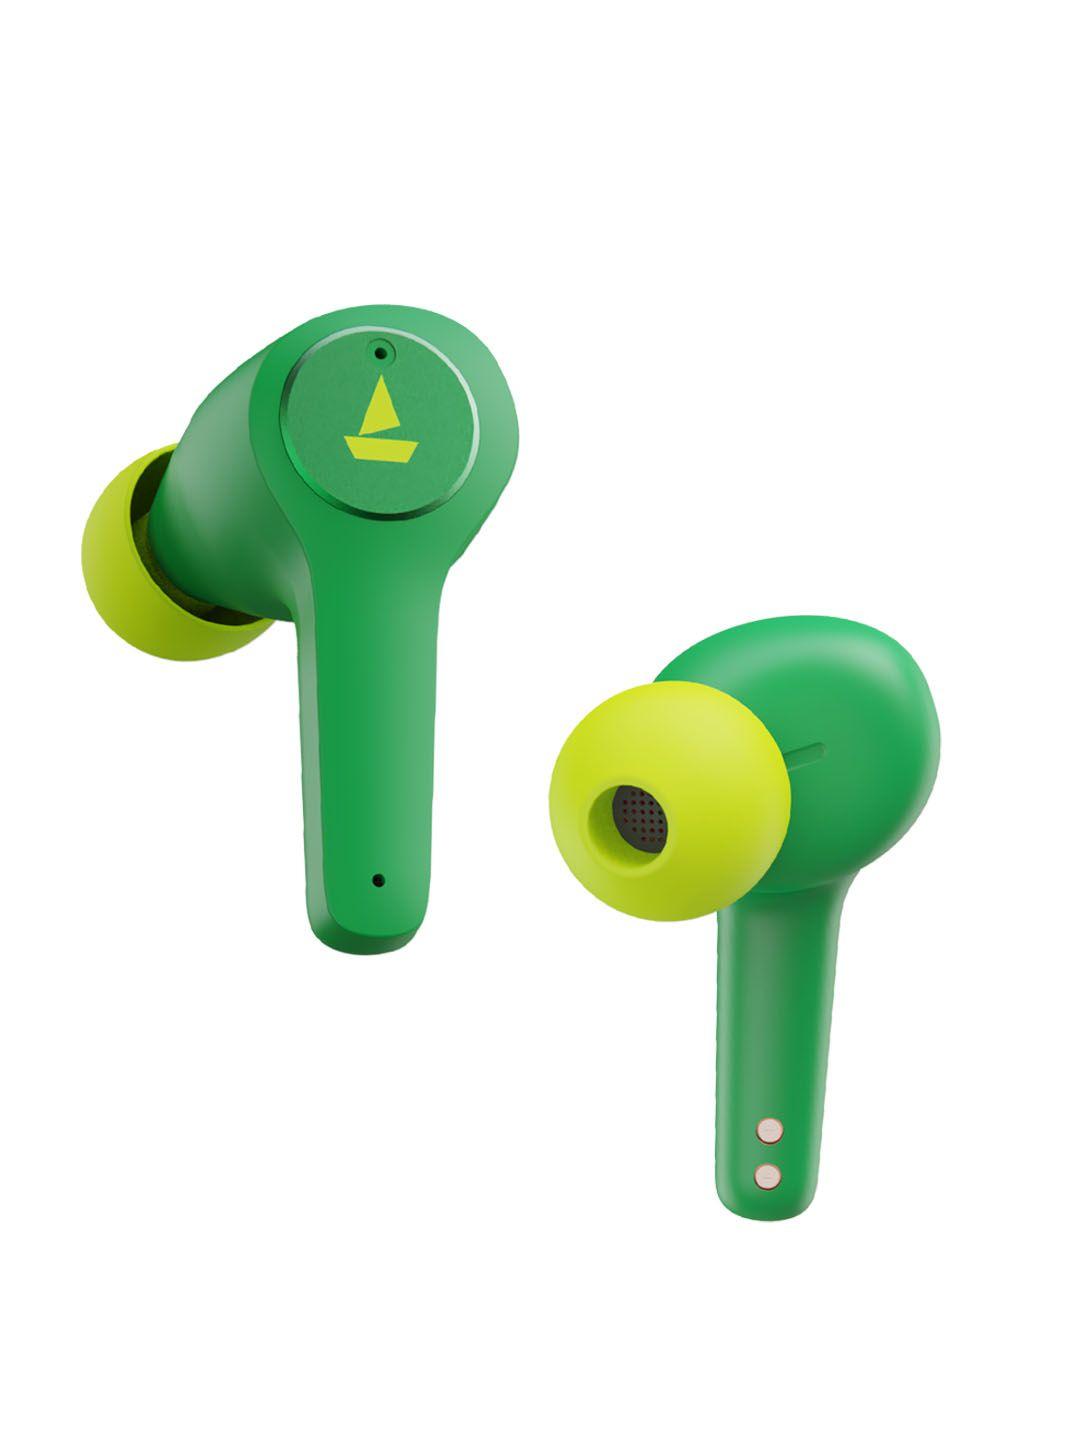 boat airdopes 451v2 m true wireless earbuds with 25h playback time & enx tech- viper green